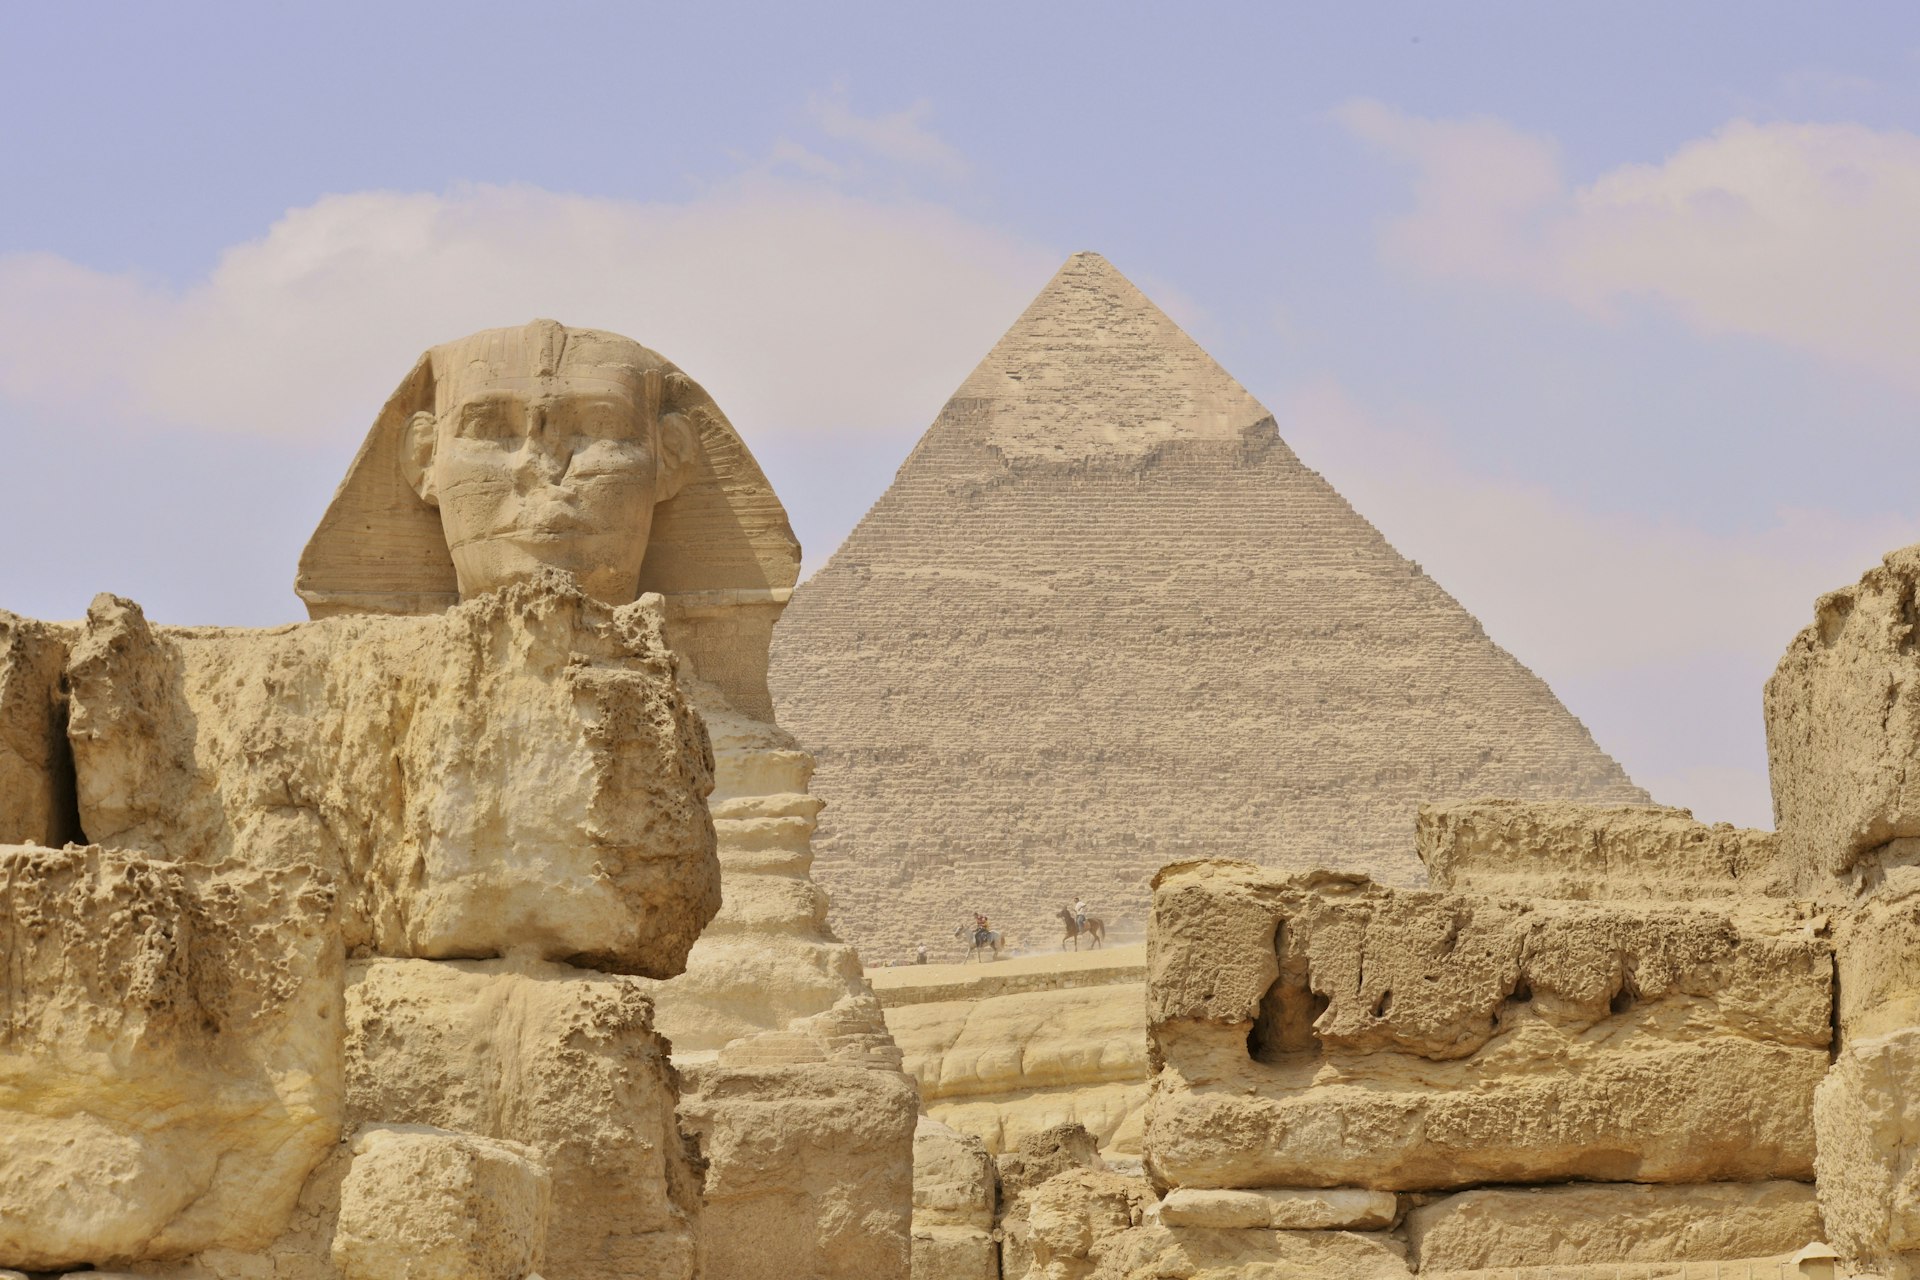 A pyramid and the Great Sphinx of Giza 